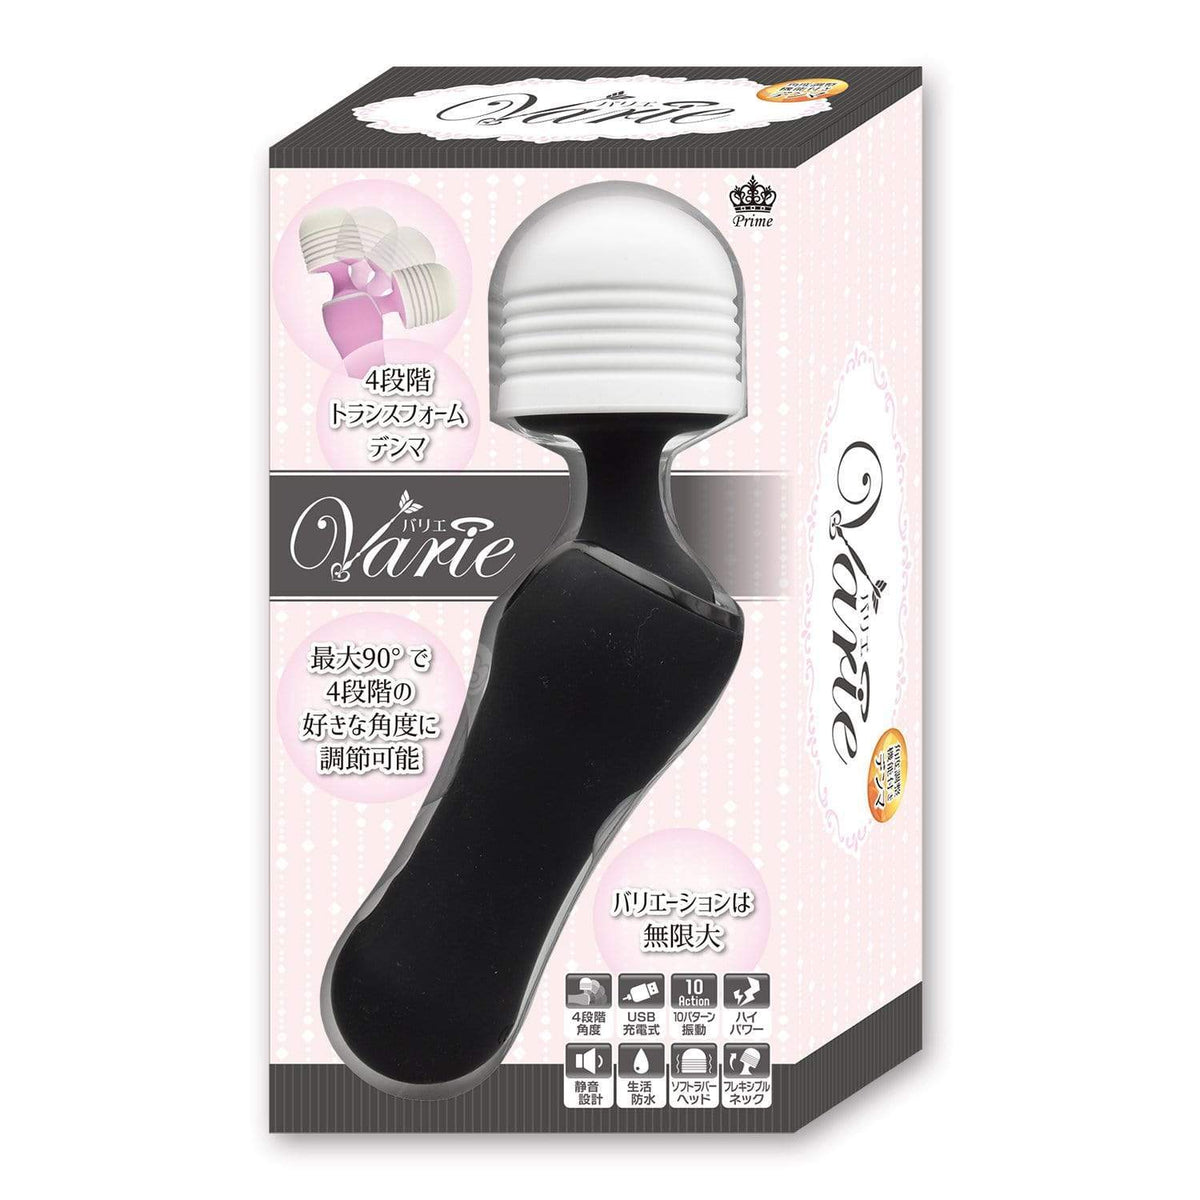 Prime - Varie Angled Wand Massager (Black) Wand Massagers (Vibration) Non Rechargeable 4580140053839 CherryAffairs